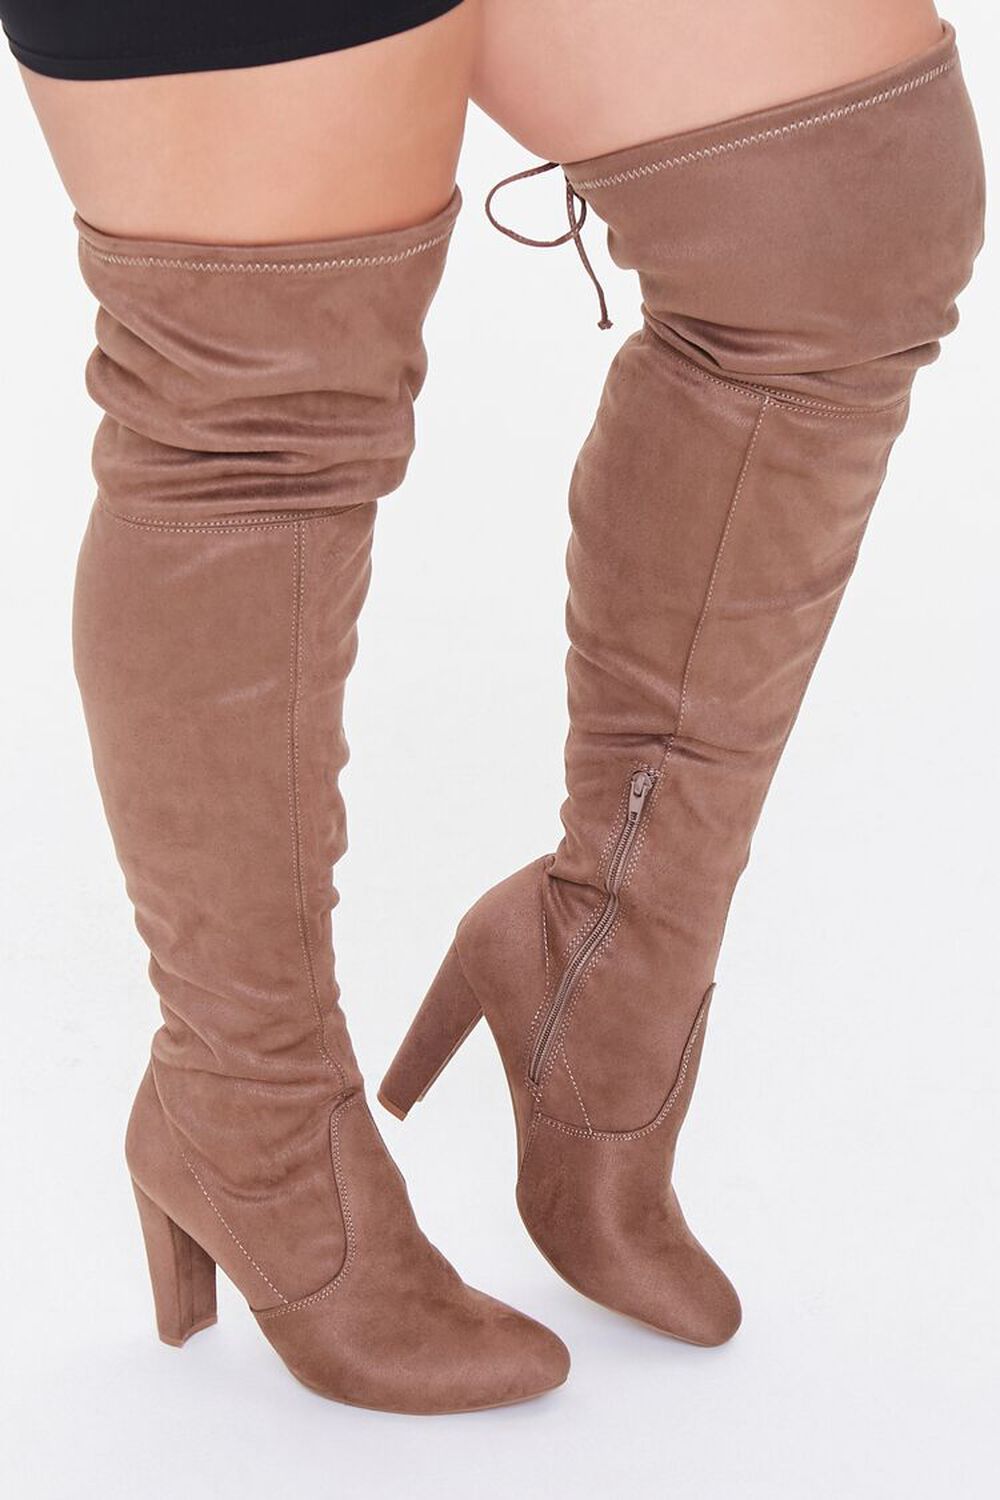 TAUPE Faux Suede Block Heel Boots (Wide), image 1